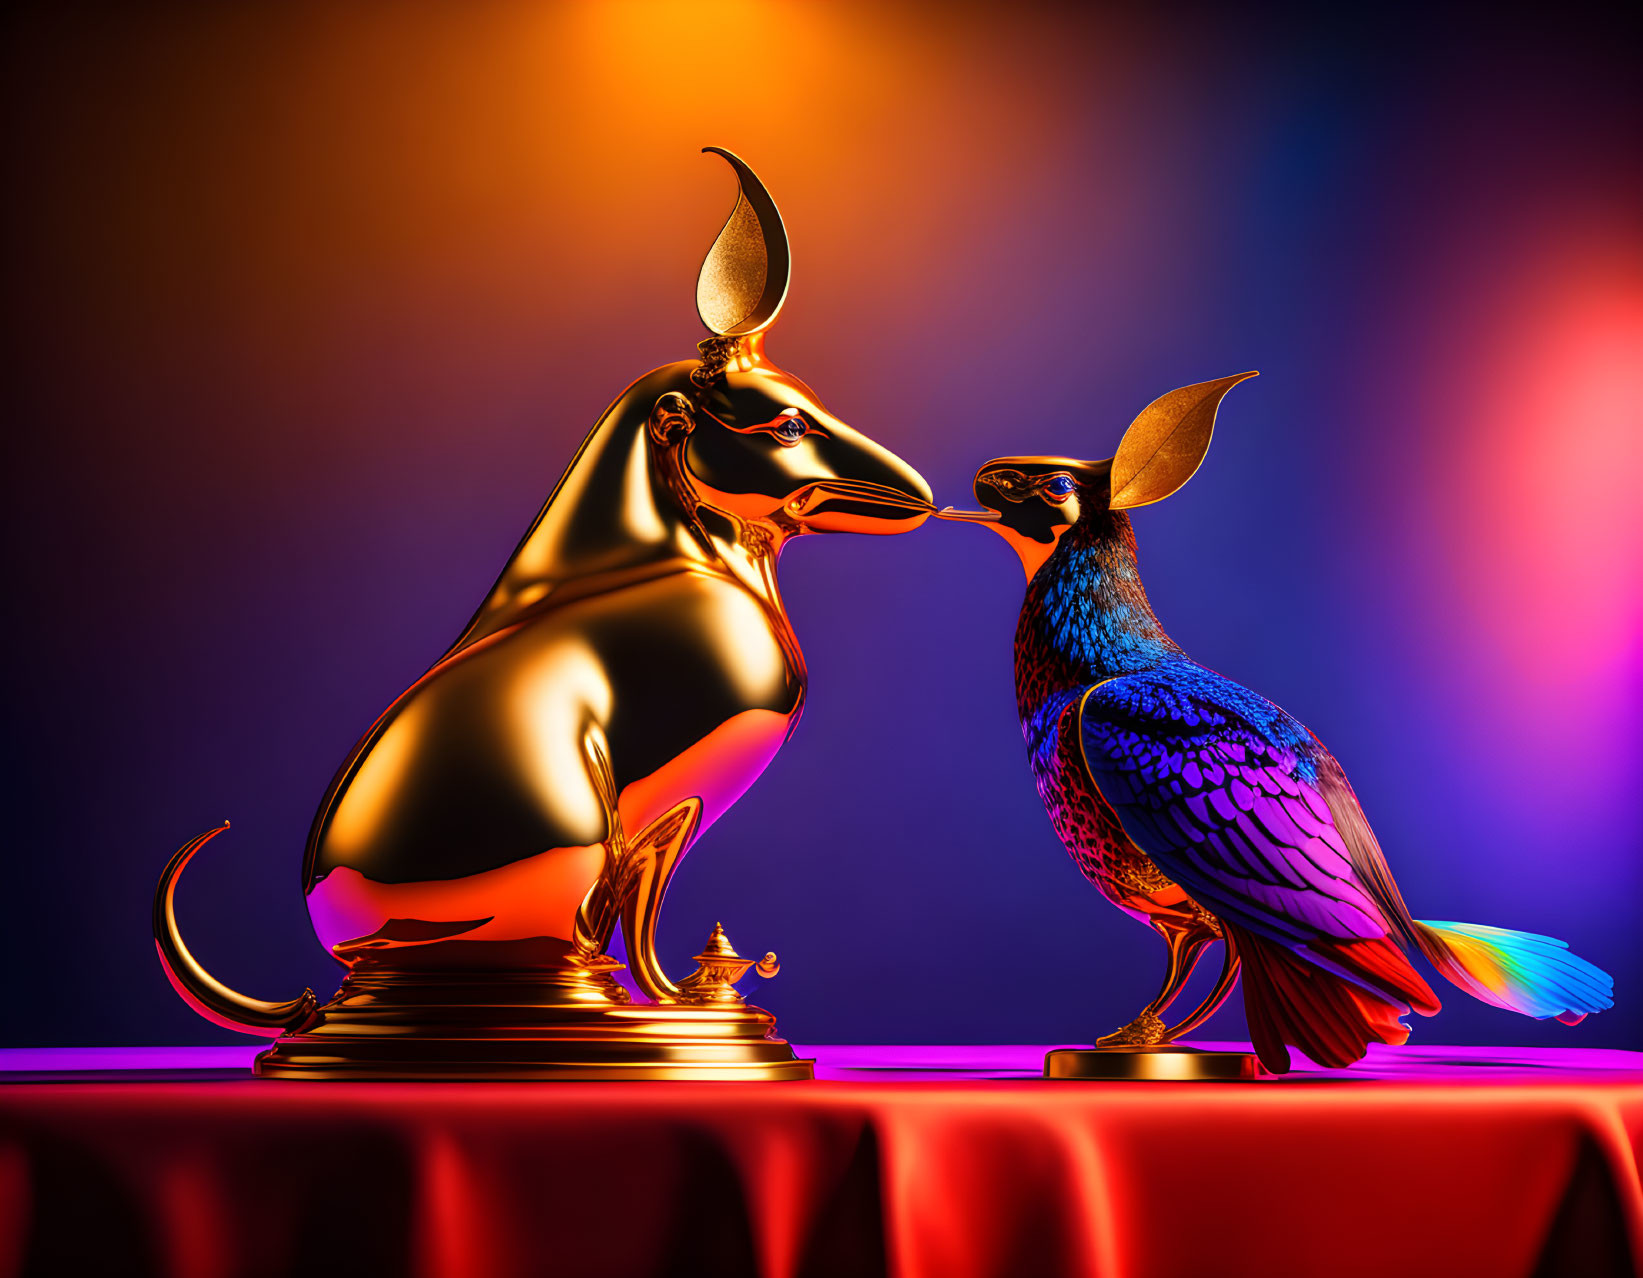 Golden Anubis statue meets vibrant peacock on richly colored backdrop